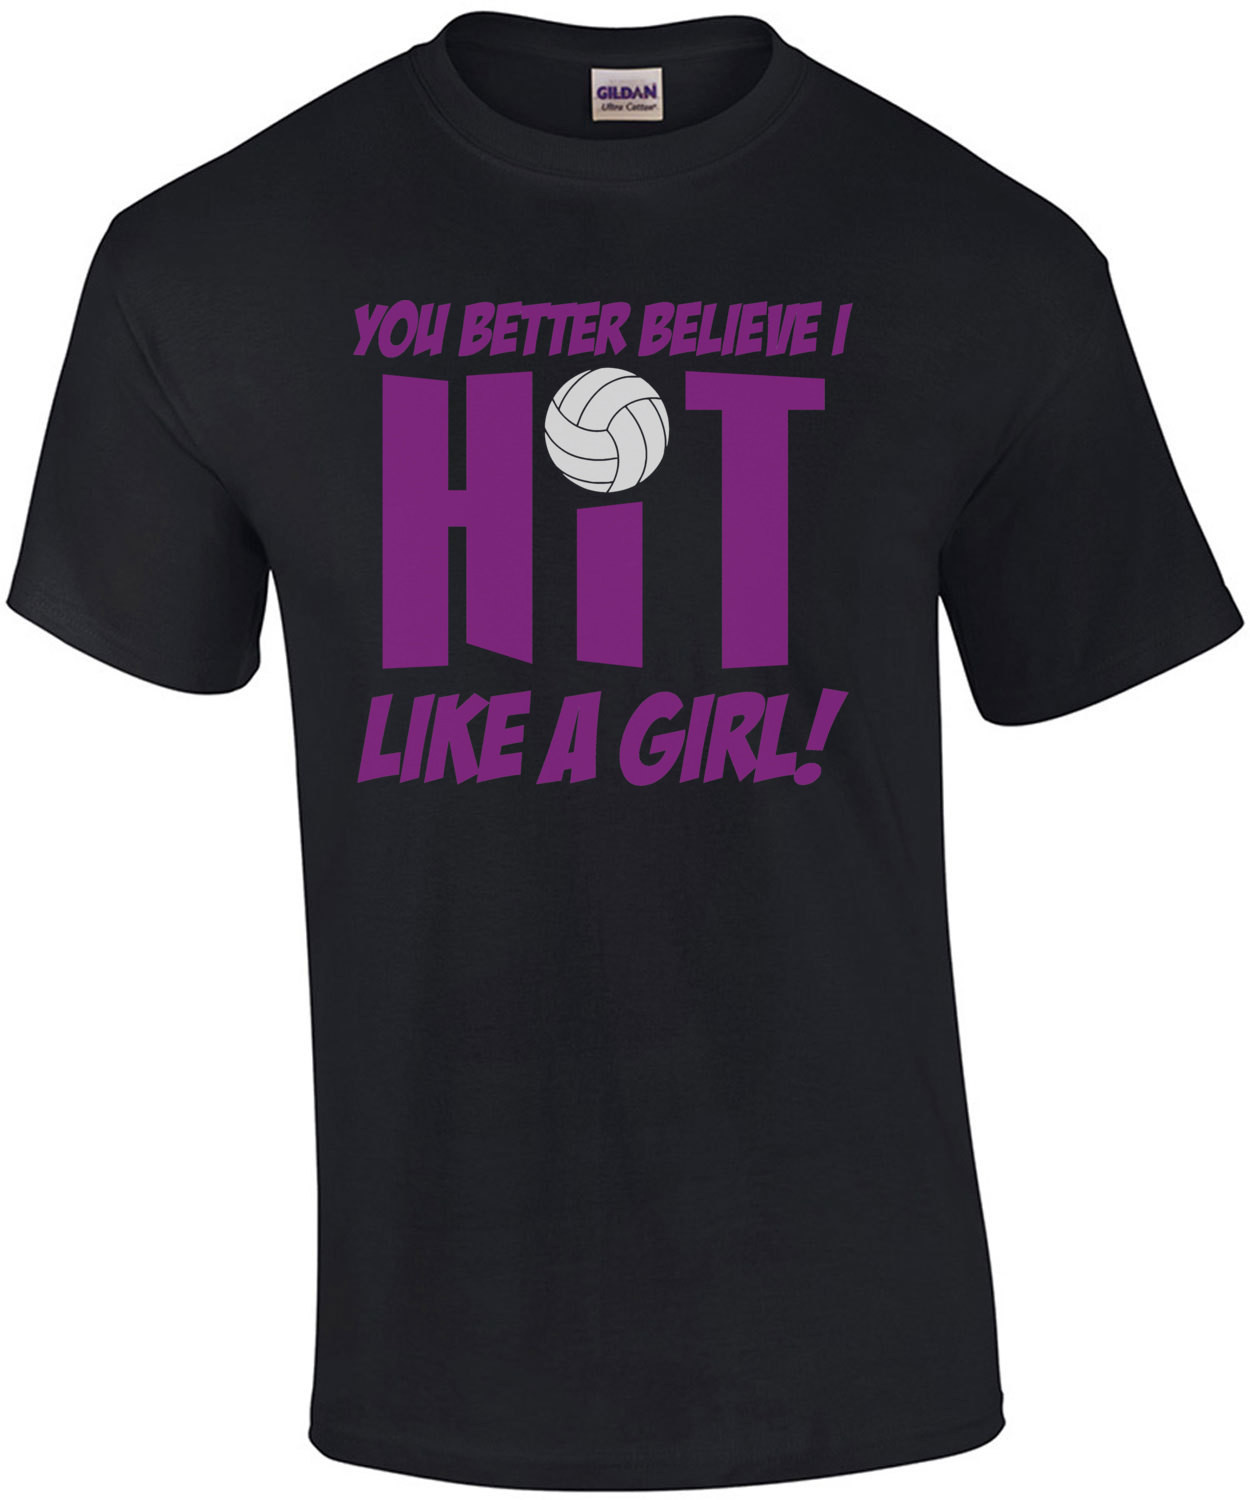 You Better Believe I Hit Like A Girl T-Shirt